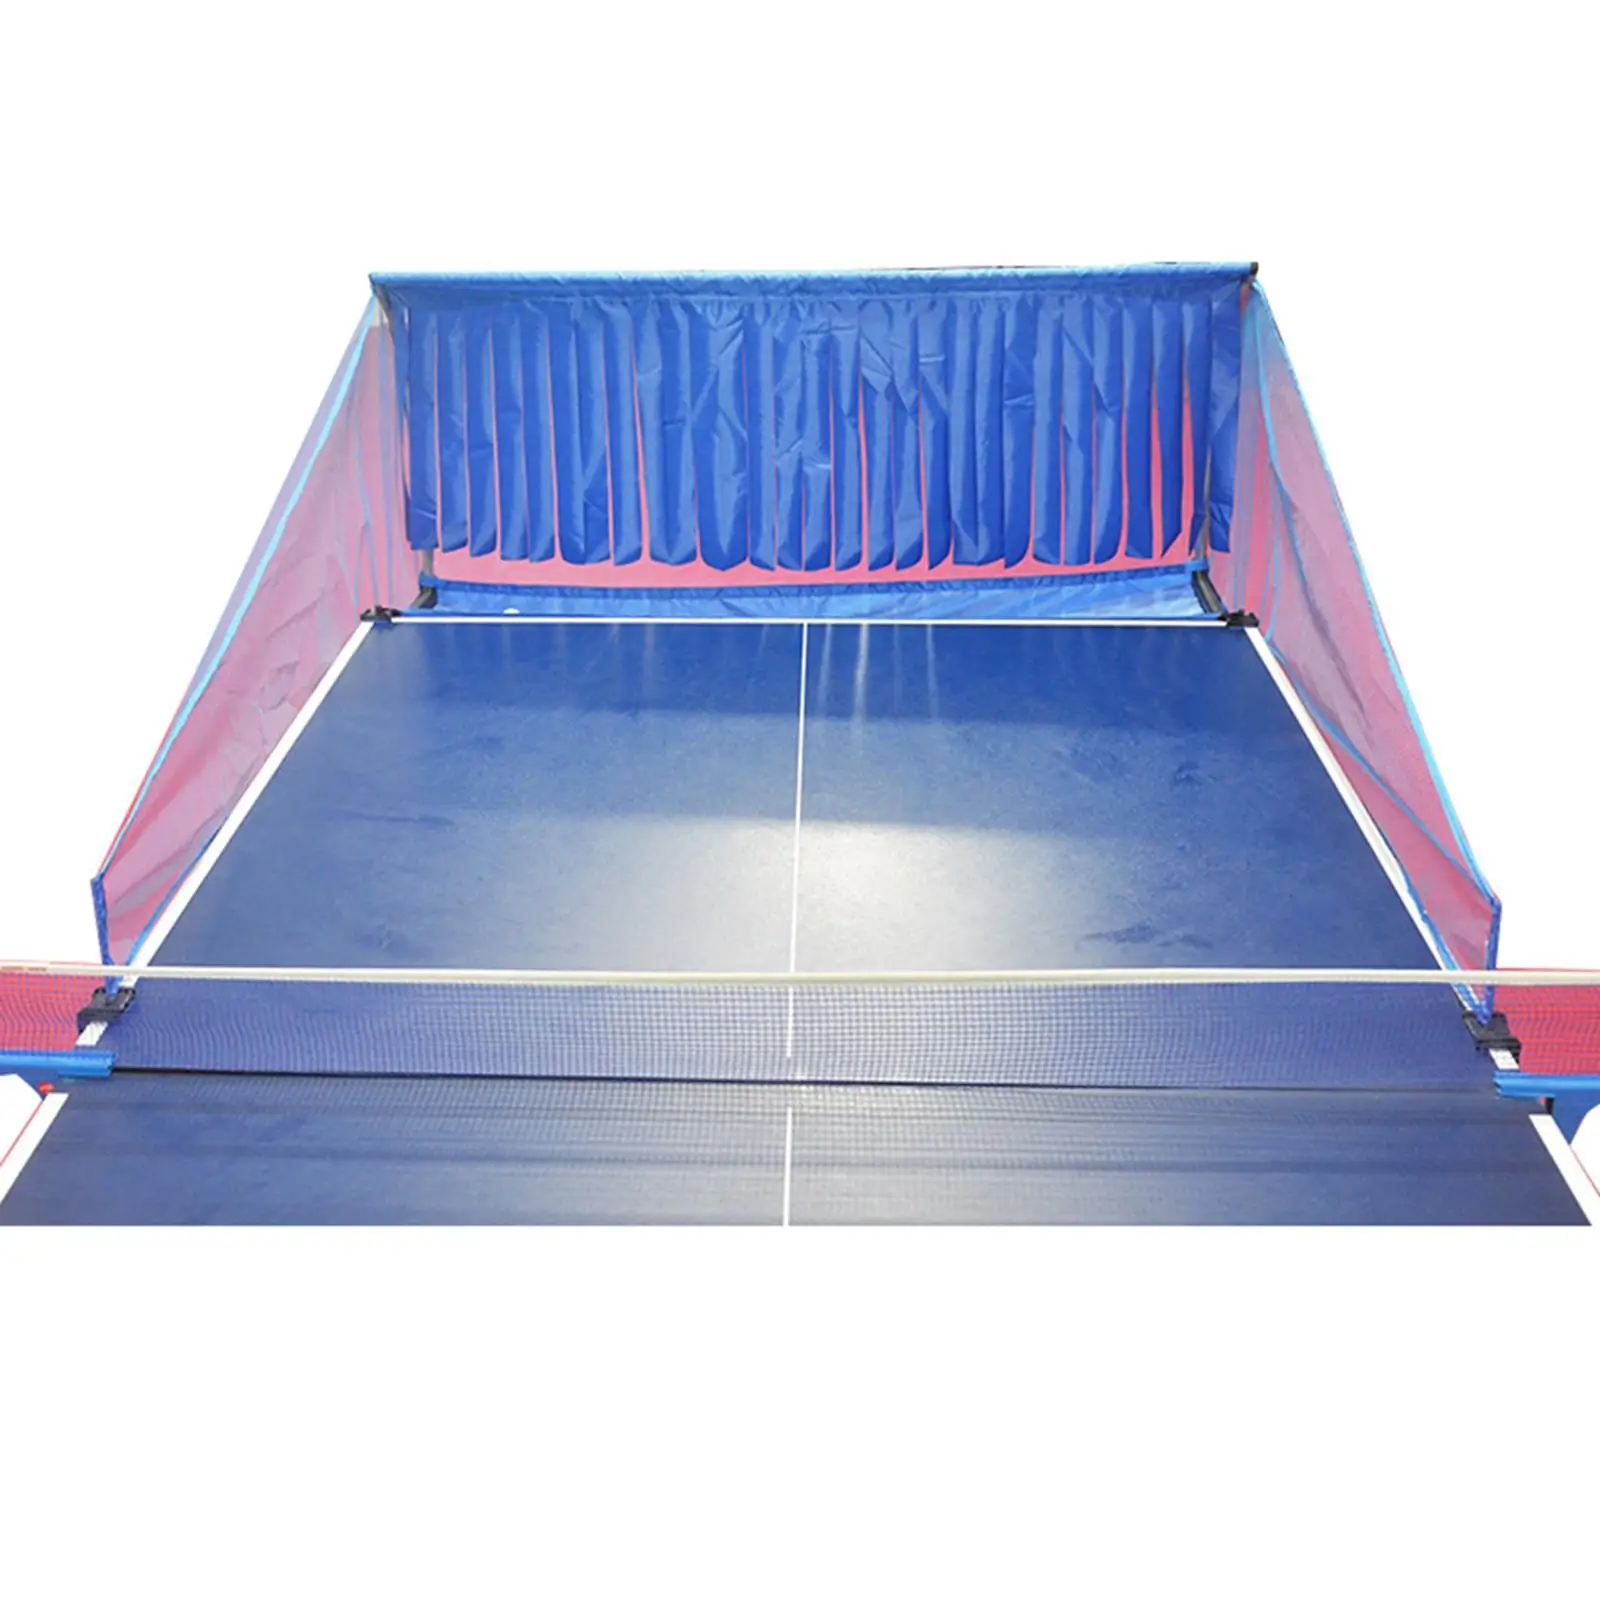 Table Tennis Ball Net Collector with Stainless Steel Frames Durable Universal Collection net Pong Ball Collecting Net